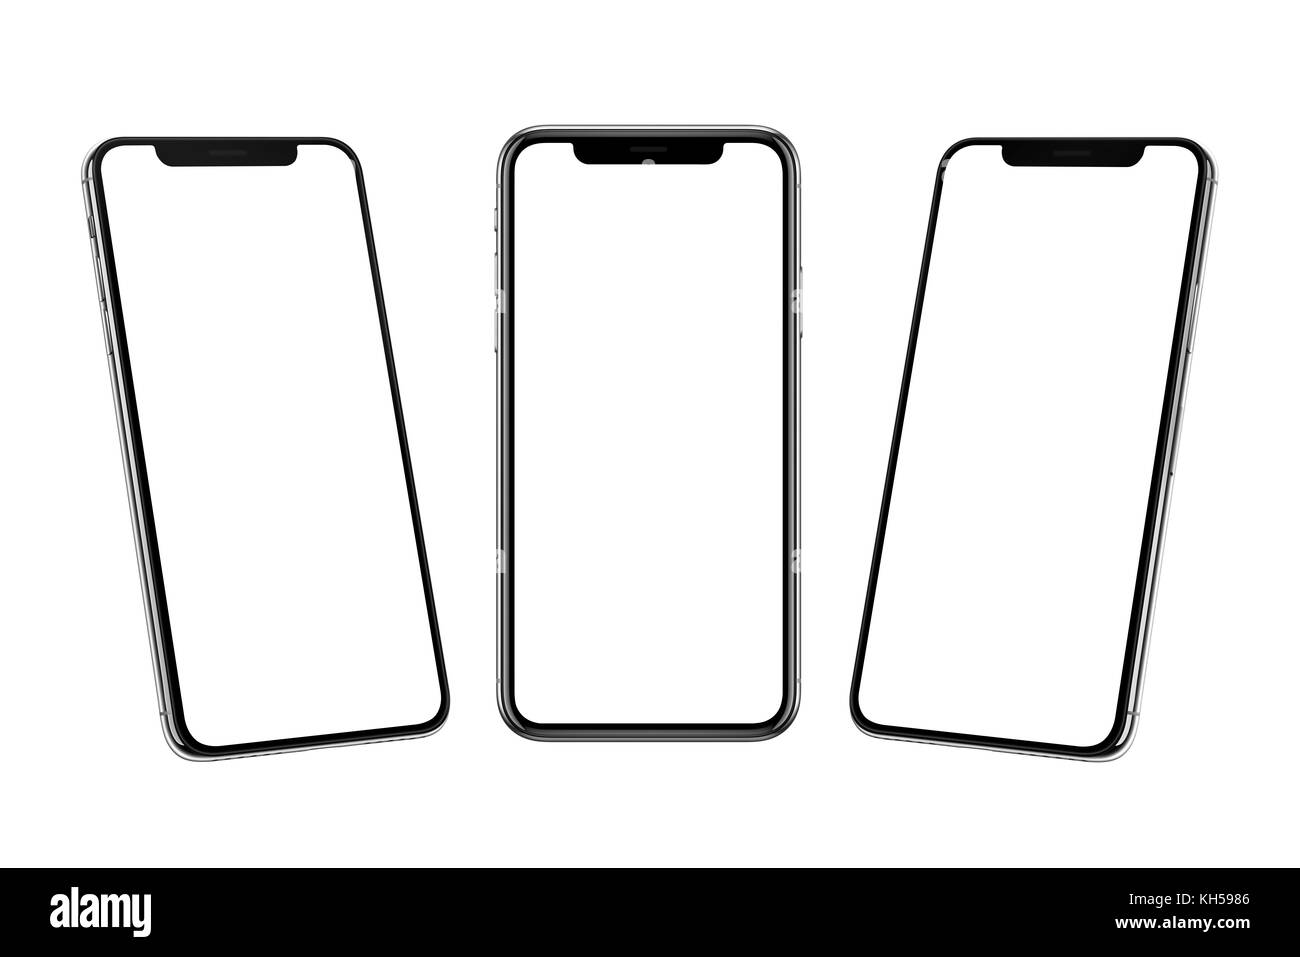 Multiple smart phones with x curved screen in front, left and right side position. Stock Photo